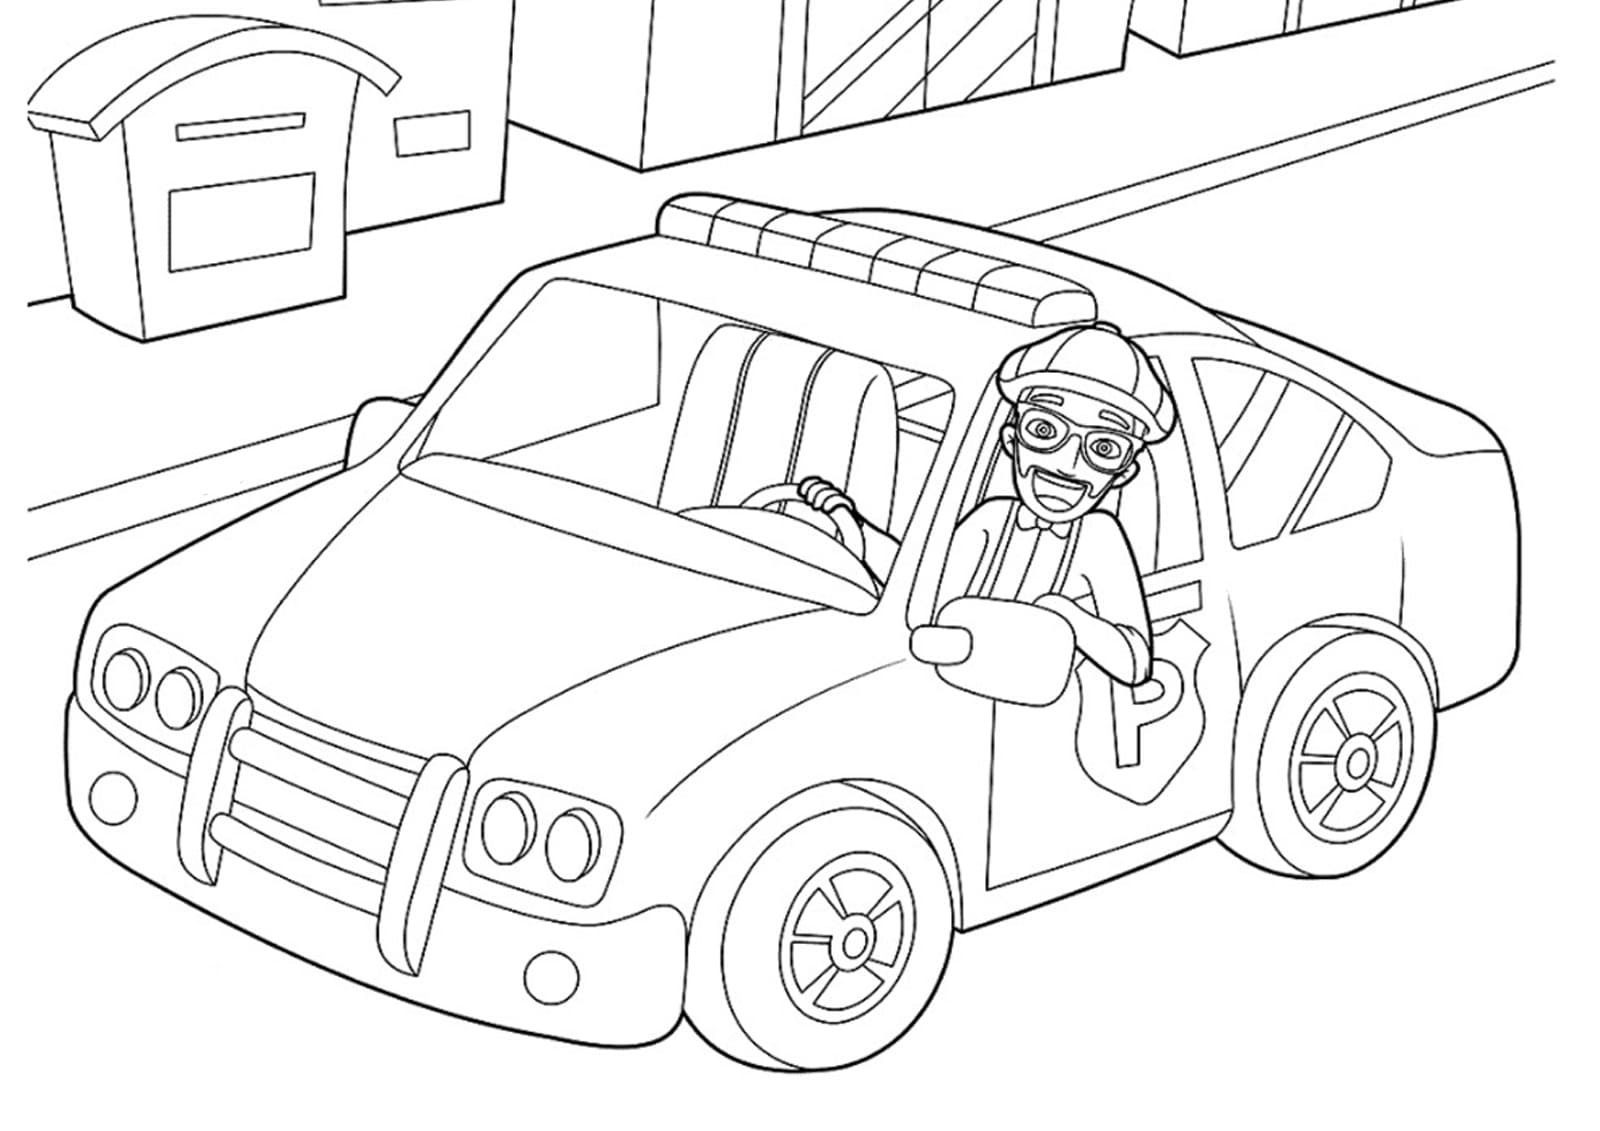 Blippi Coloring Pages to Print